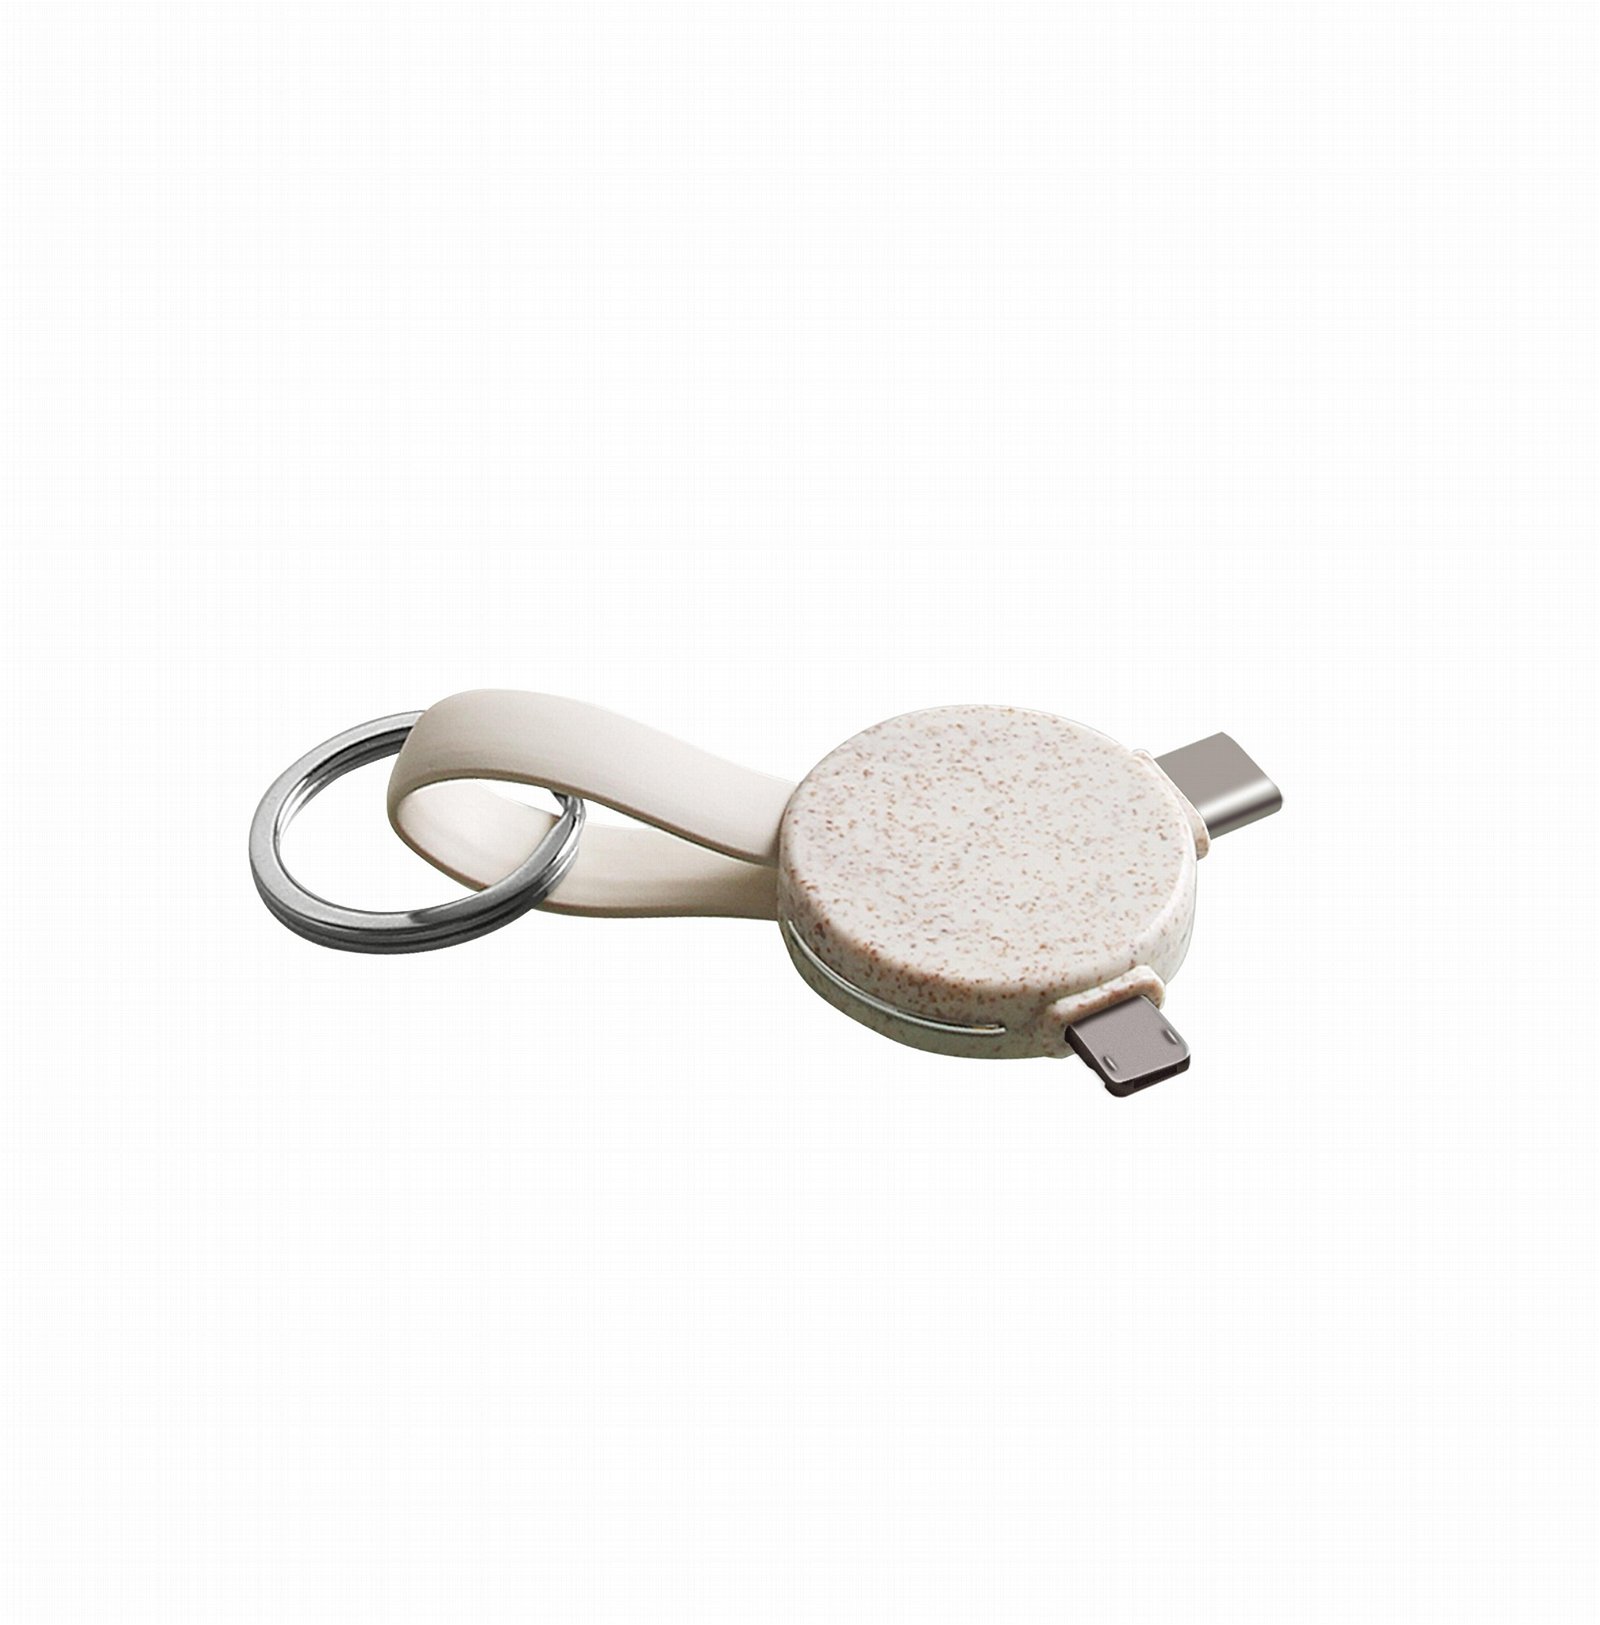 Wheat Straw 3 in 1 charging cable